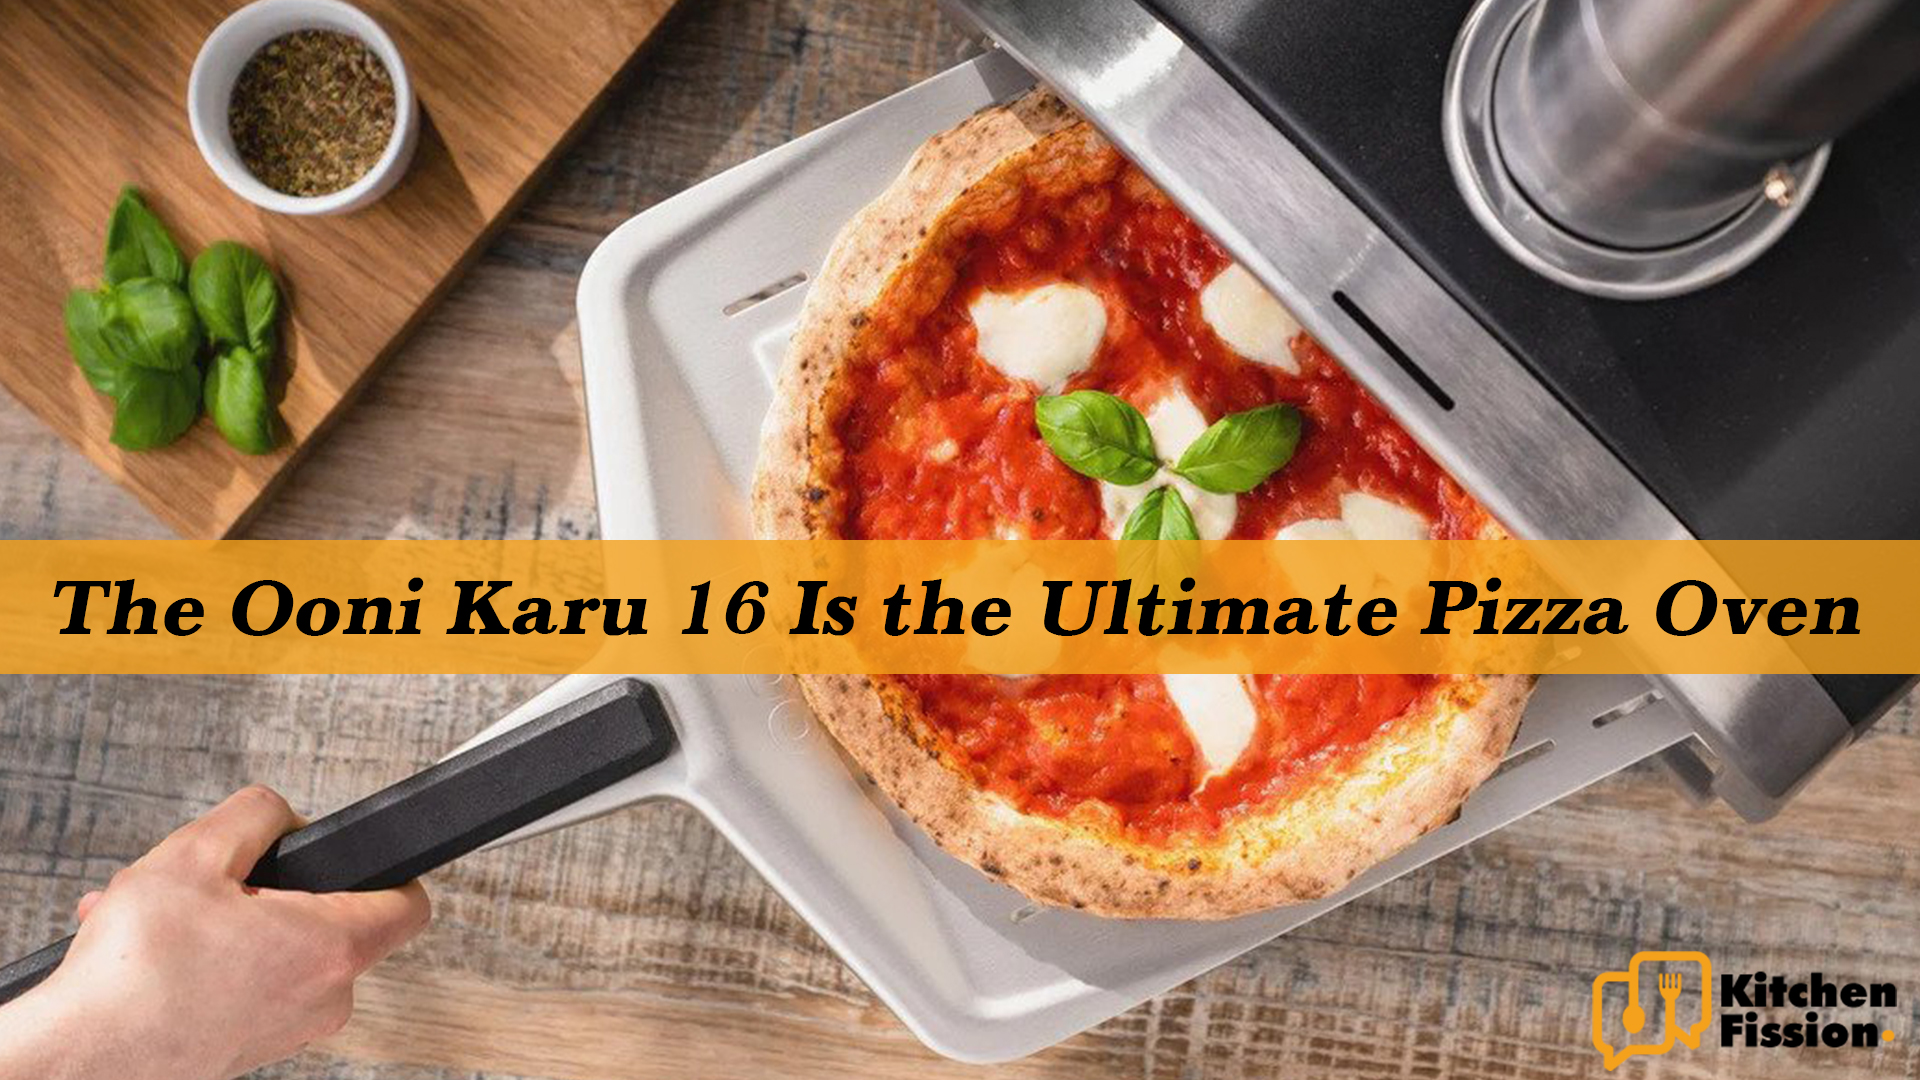 The Ooni Karu 16 Is the Ultimate Pizza Oven